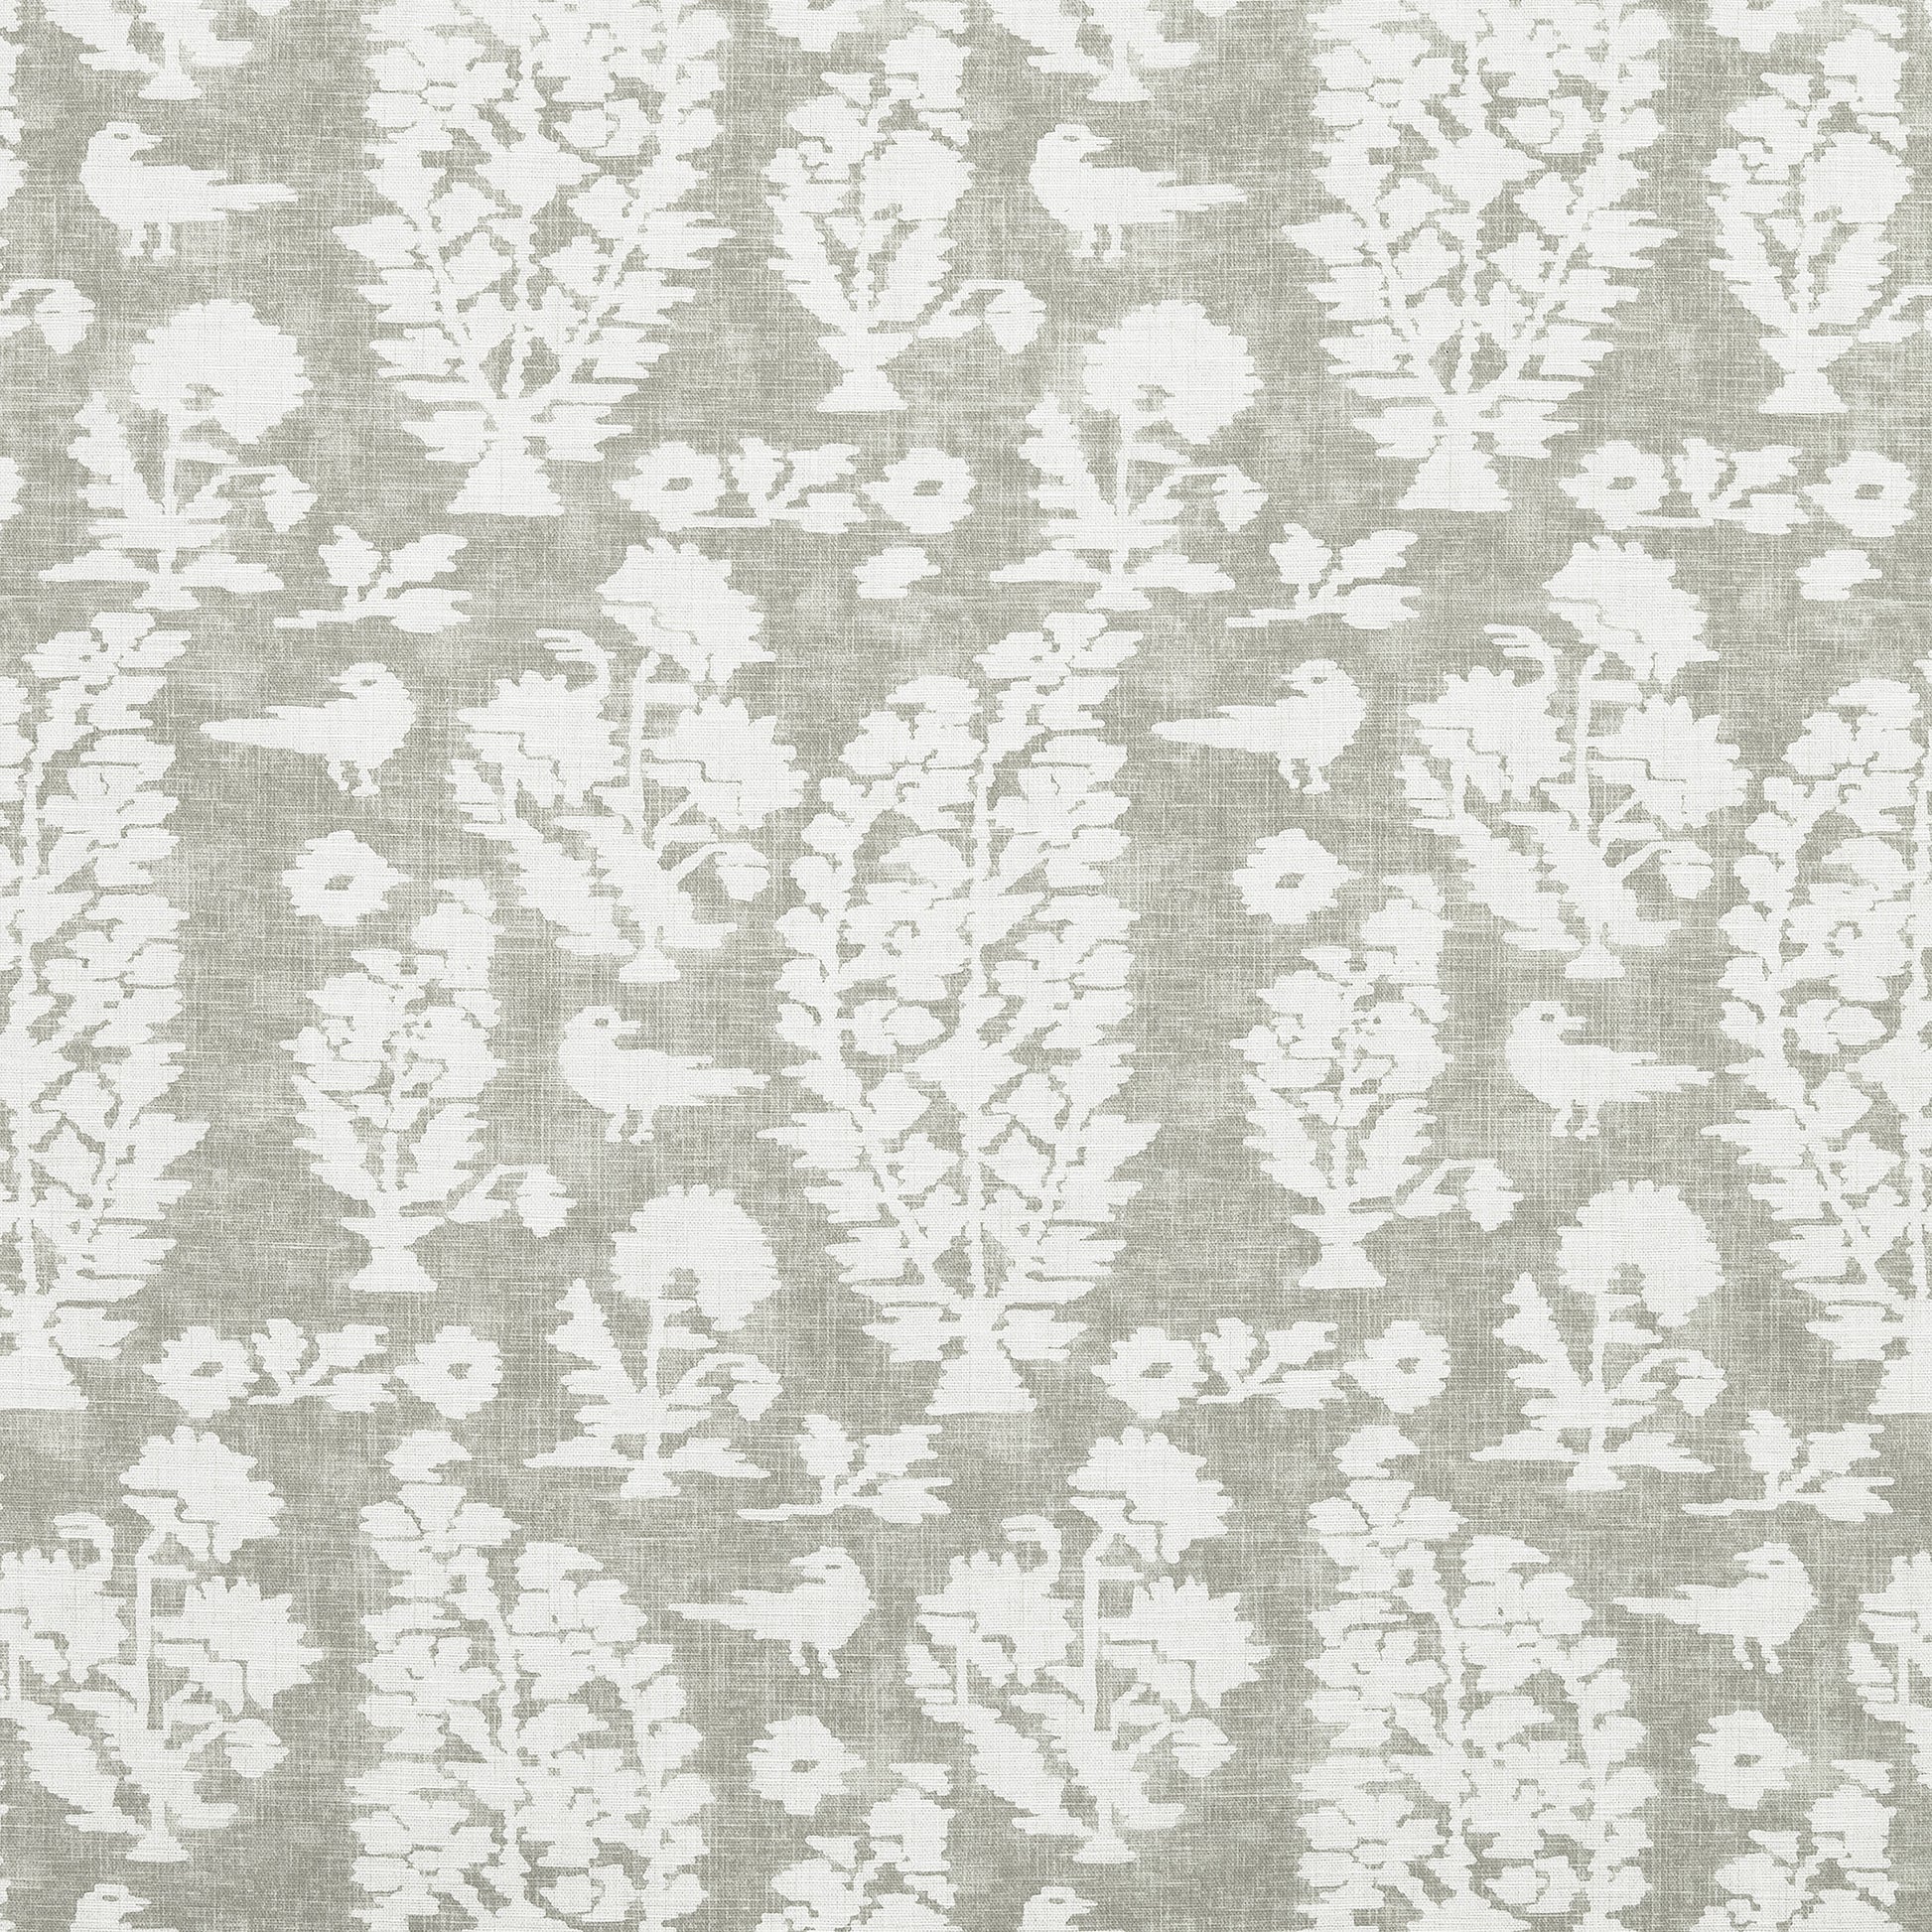 Buy samples of F972596 Allaire Printed Chestnut Hill Thibaut Fabrics